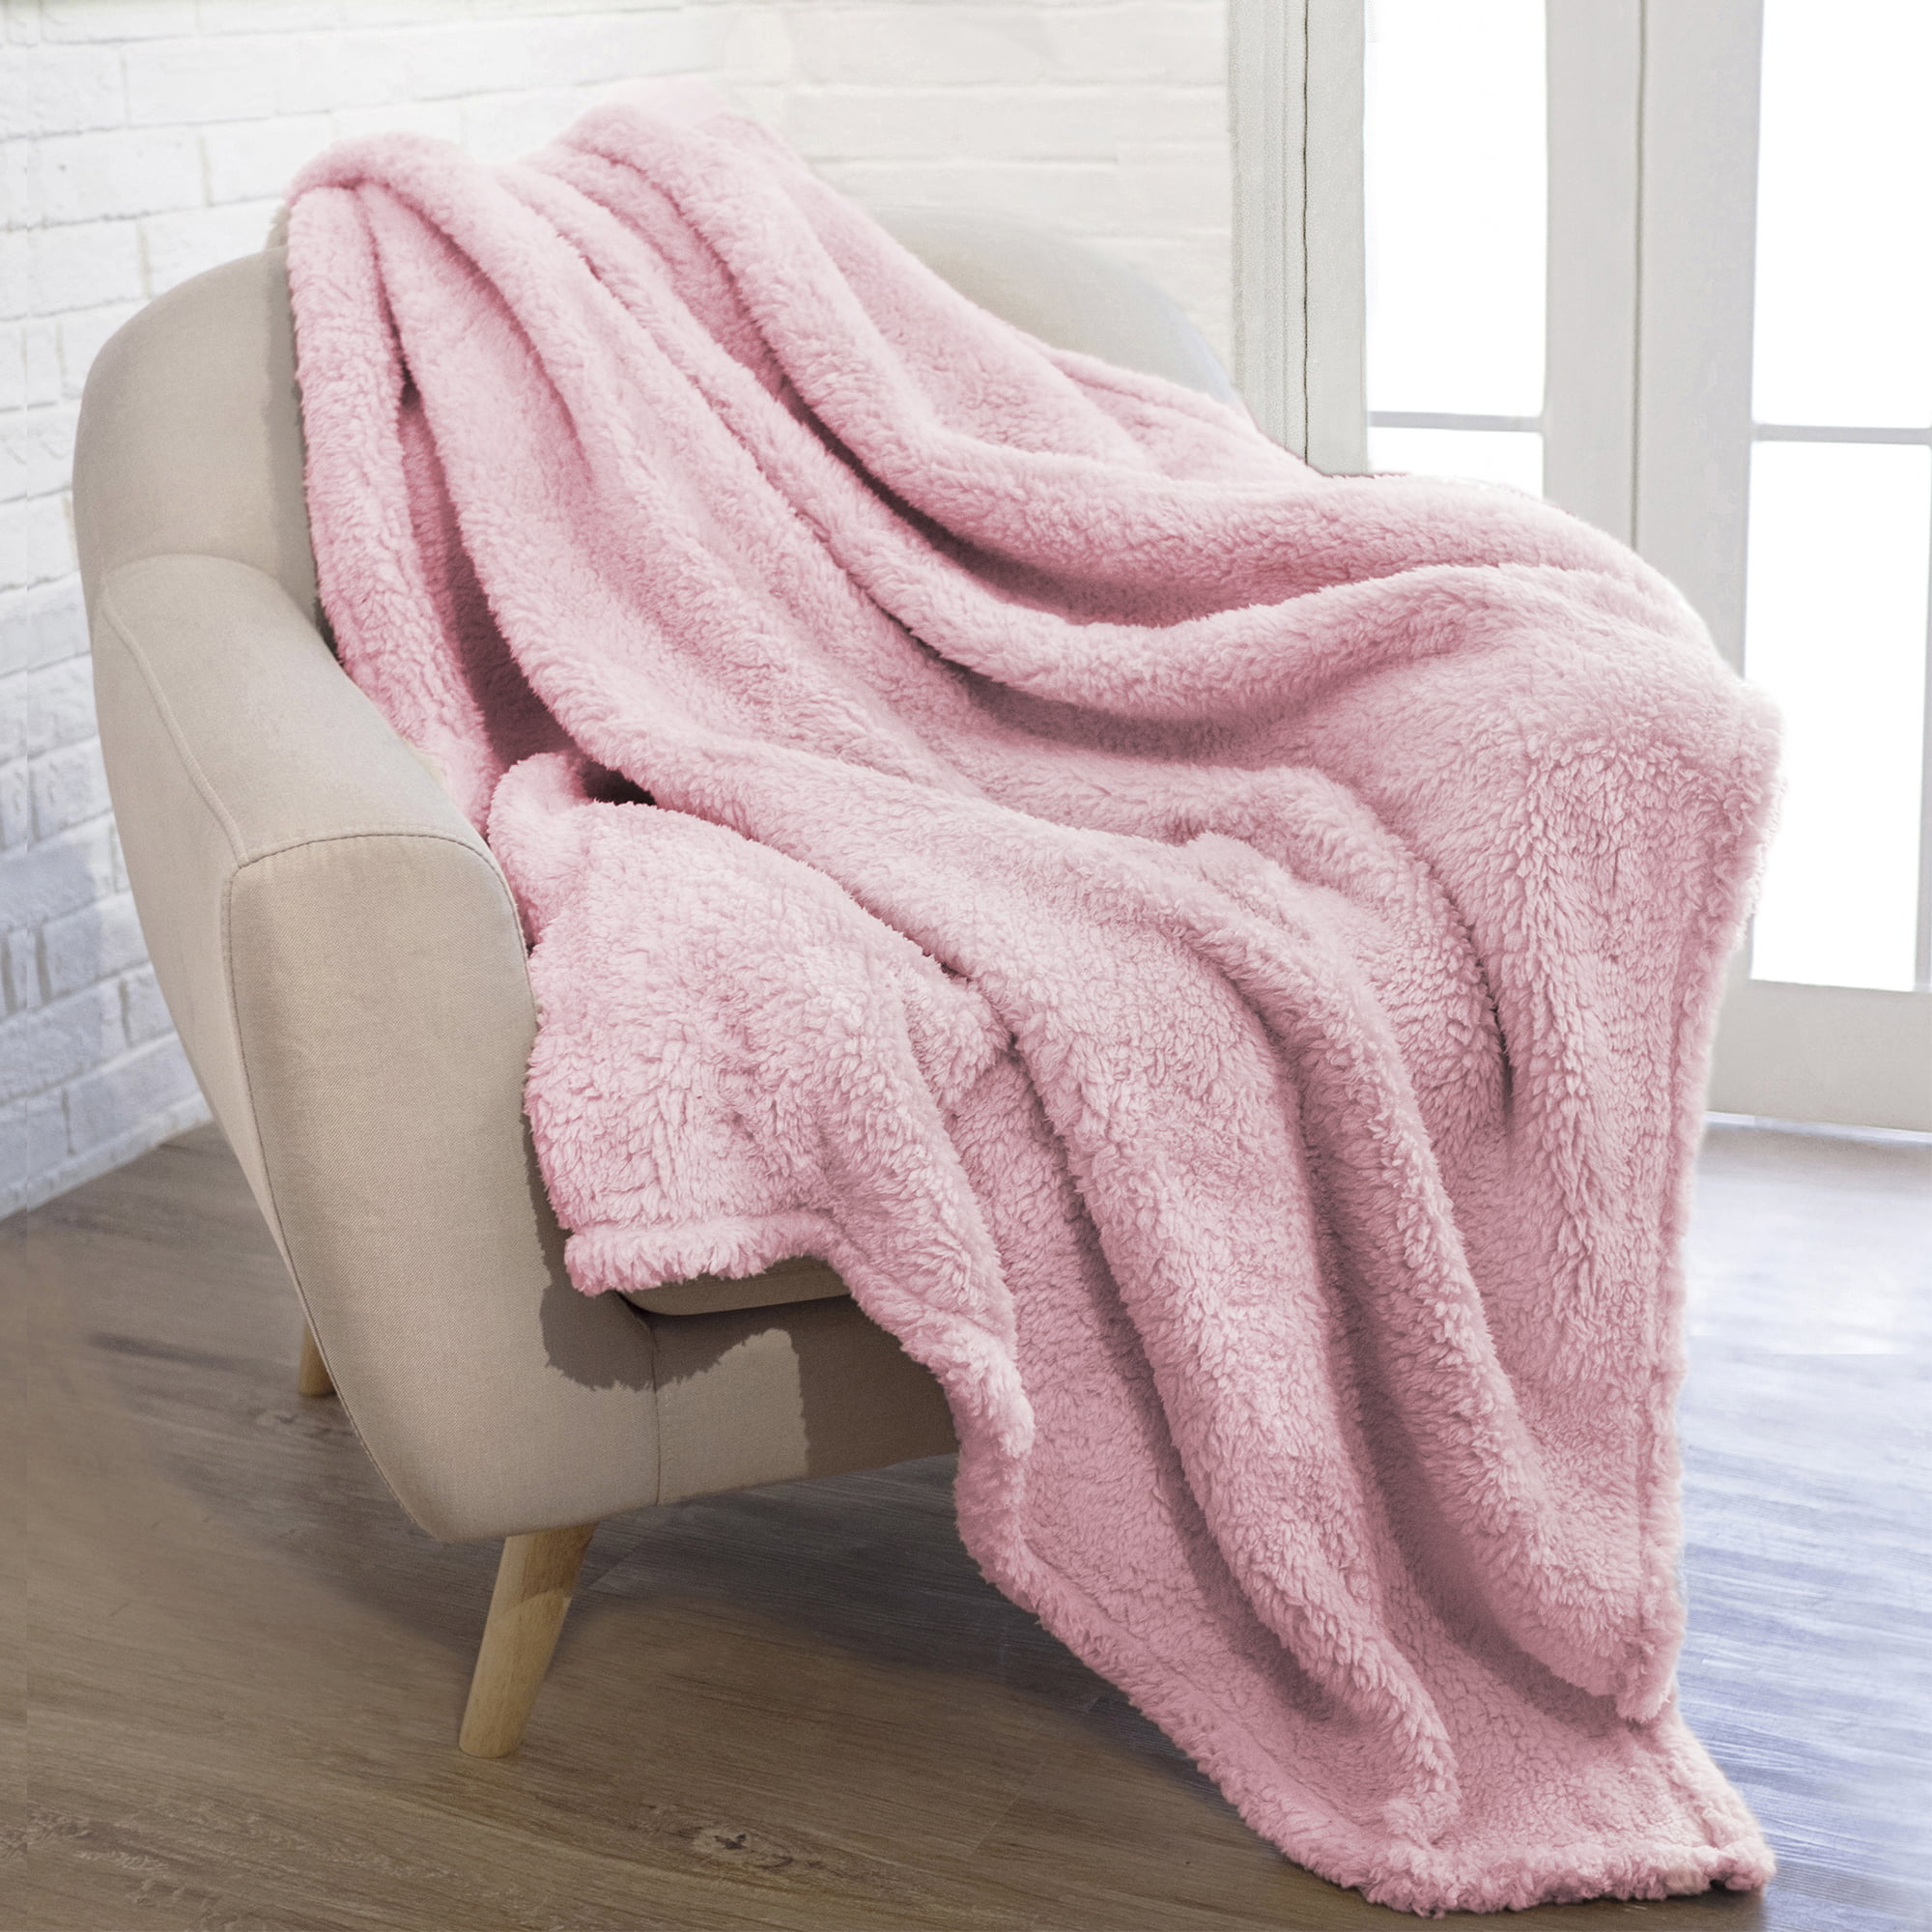 Sherpa Hot Winter Fluffy Warm Soft Plush Solid Color Roll-up Throw Home Blankets 